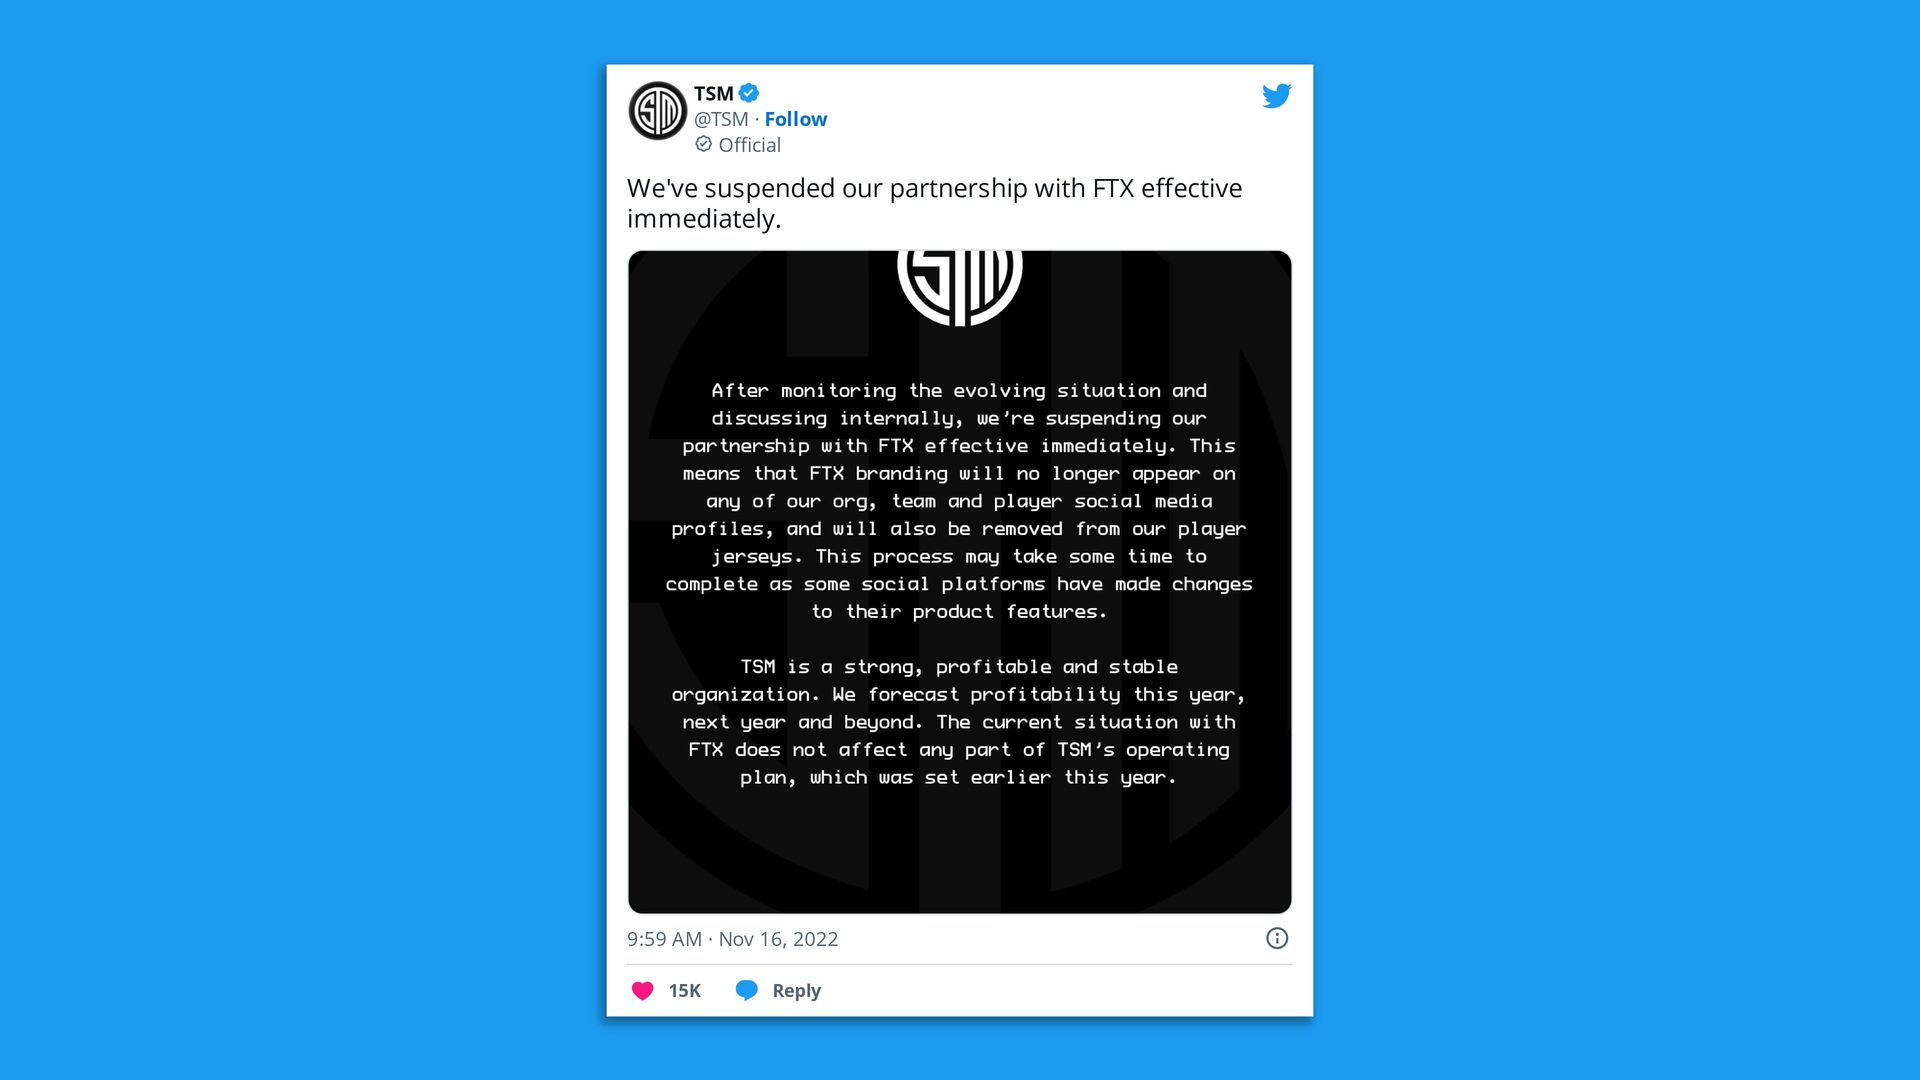 Screenshot of a tweet from TSM stating, in part: "We've suspended our partnership with FTX effective immediately."